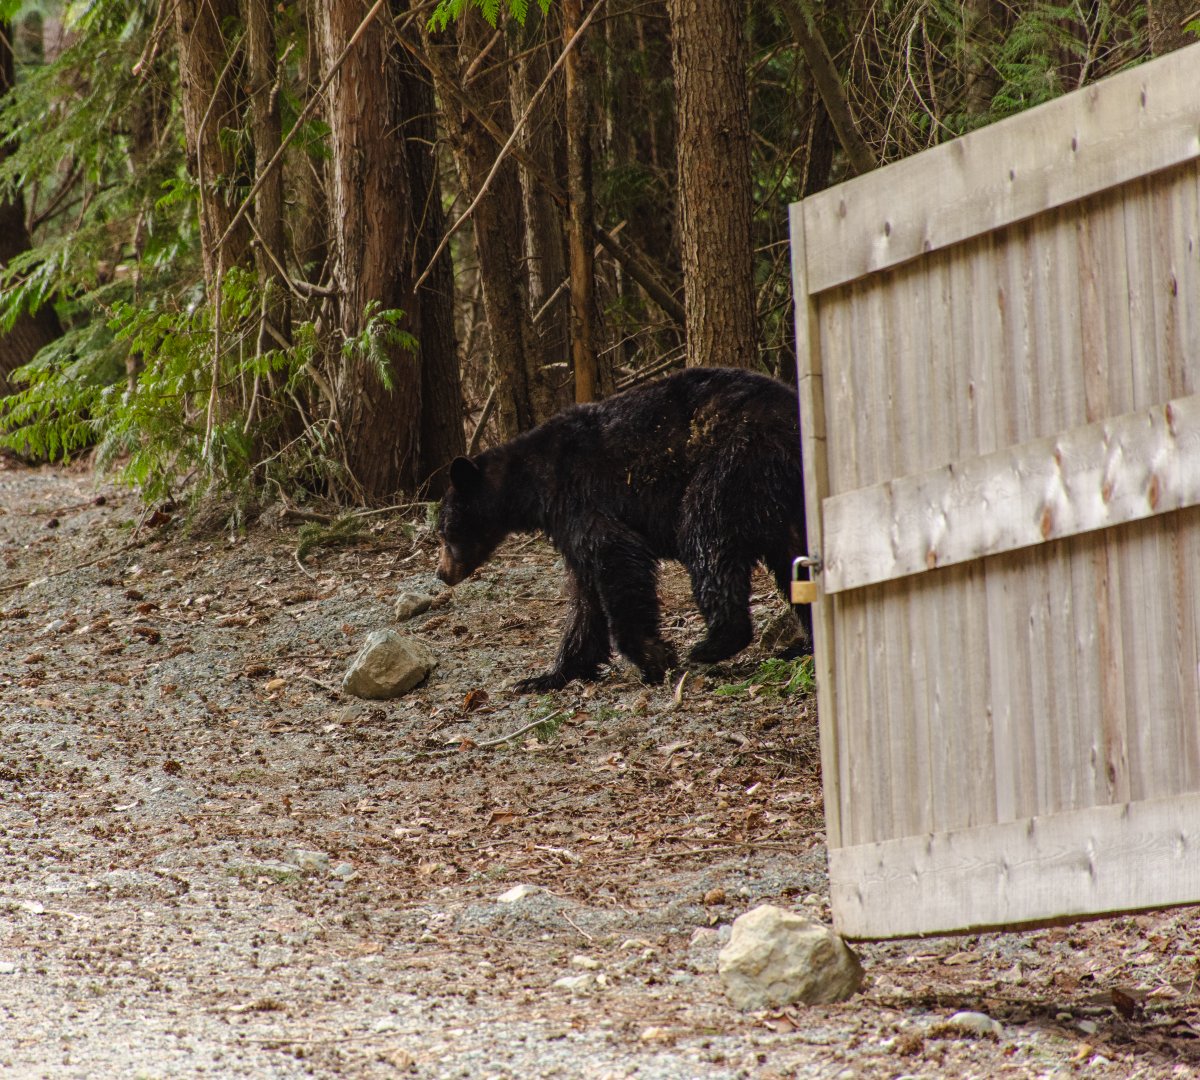 File photo of a black bear in Whistler, British Columbia walking near a gate and gravel road.